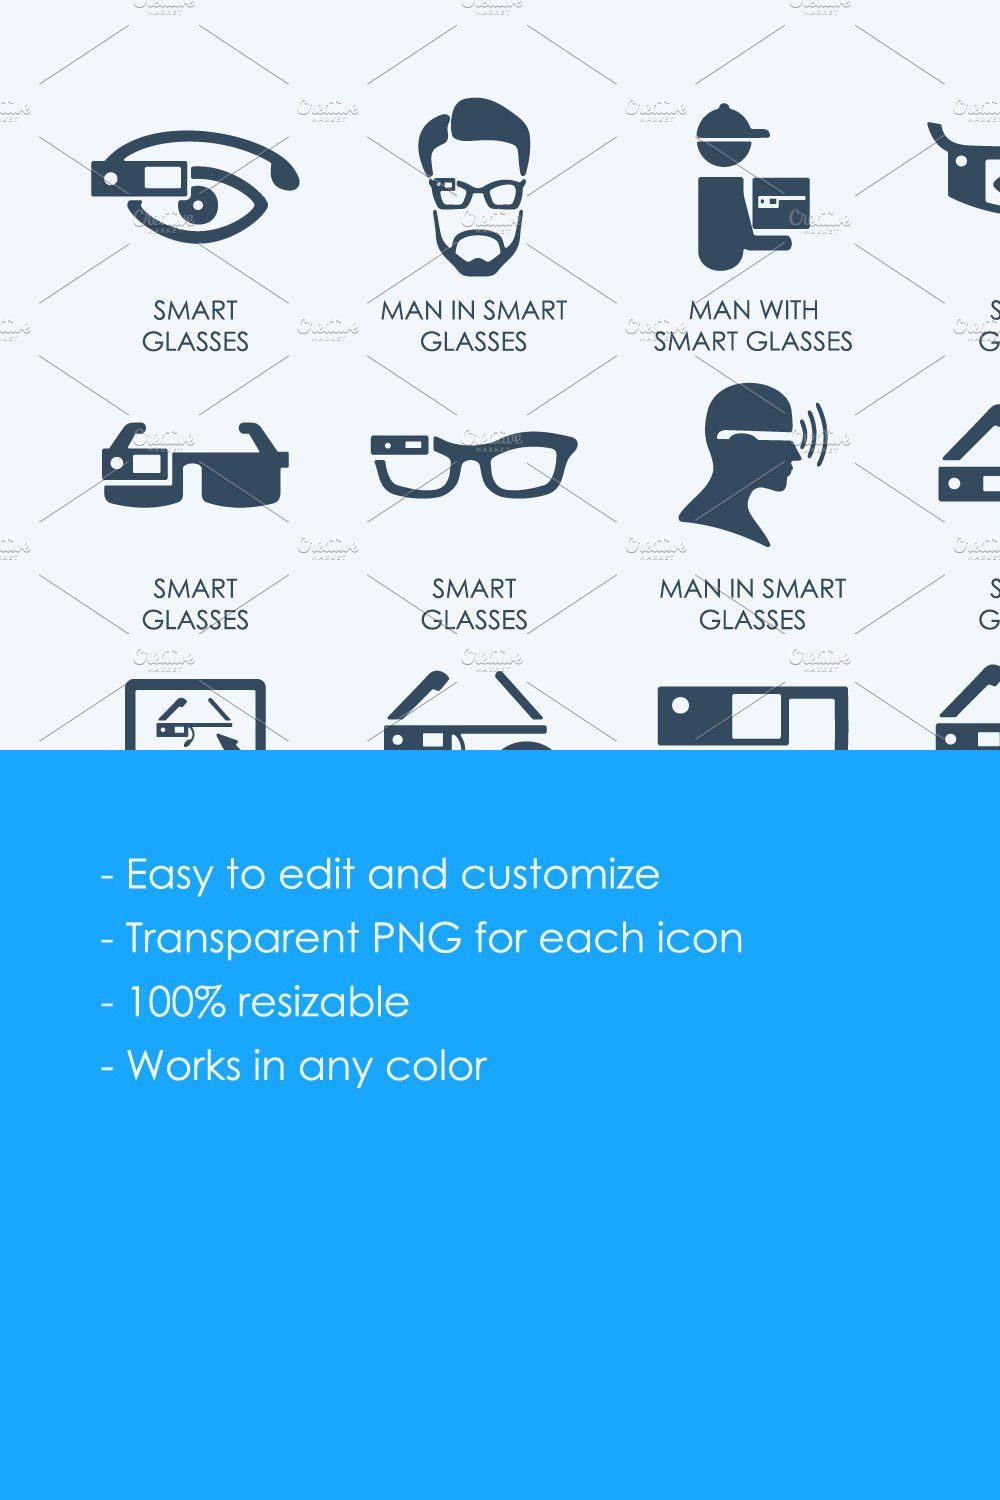 Smart glasses icons pinterest preview image.